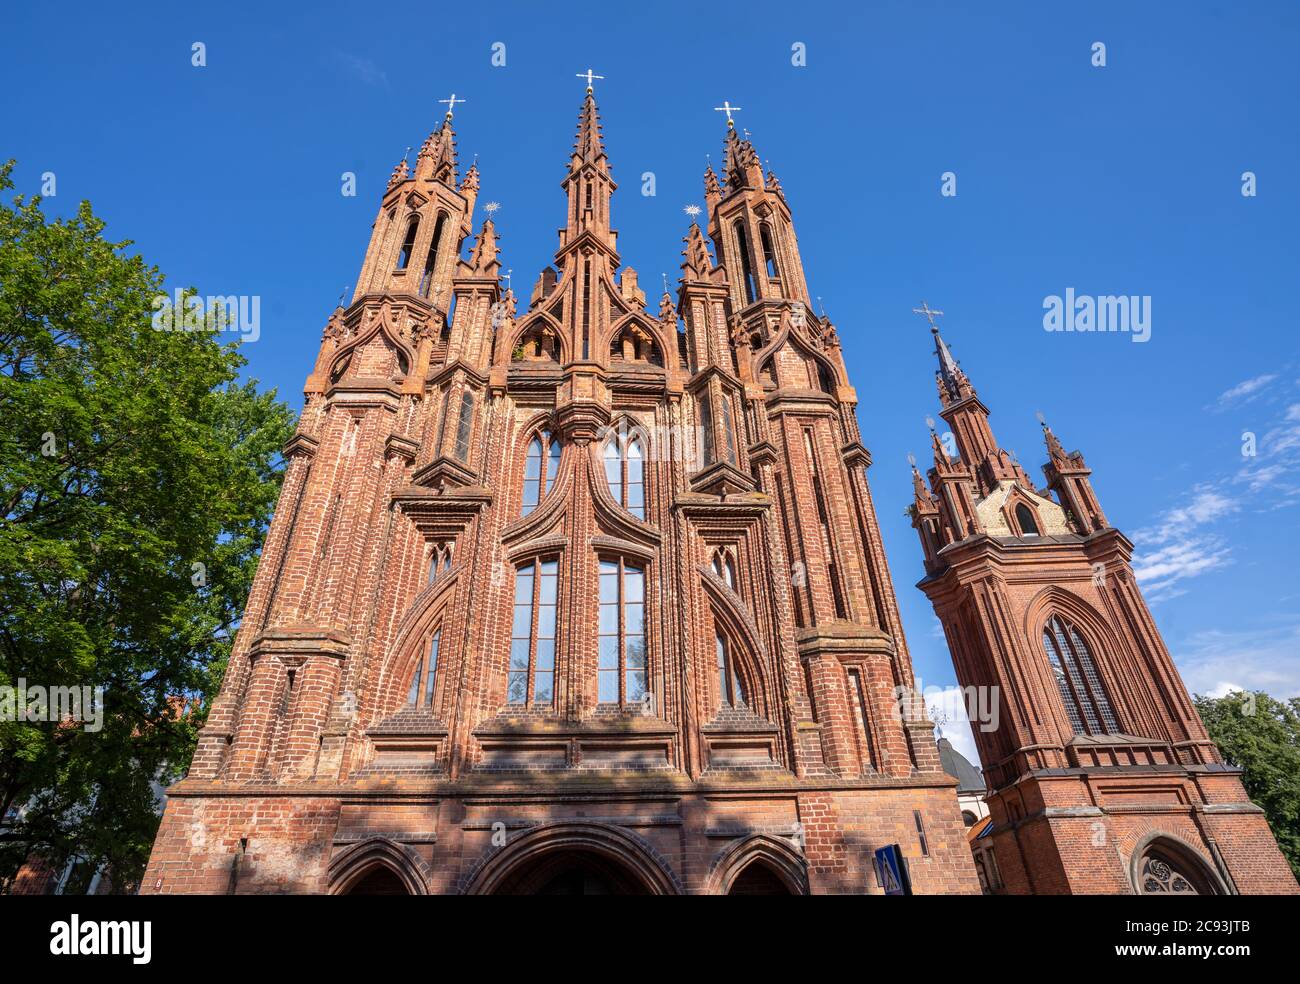 The stunning St. Anne's Church in Vilnius Old Town, Lithuania. A prominent example of both Flamboyant Gothic and Brick Gothic styles and A UNESCO Worl Stock Photo